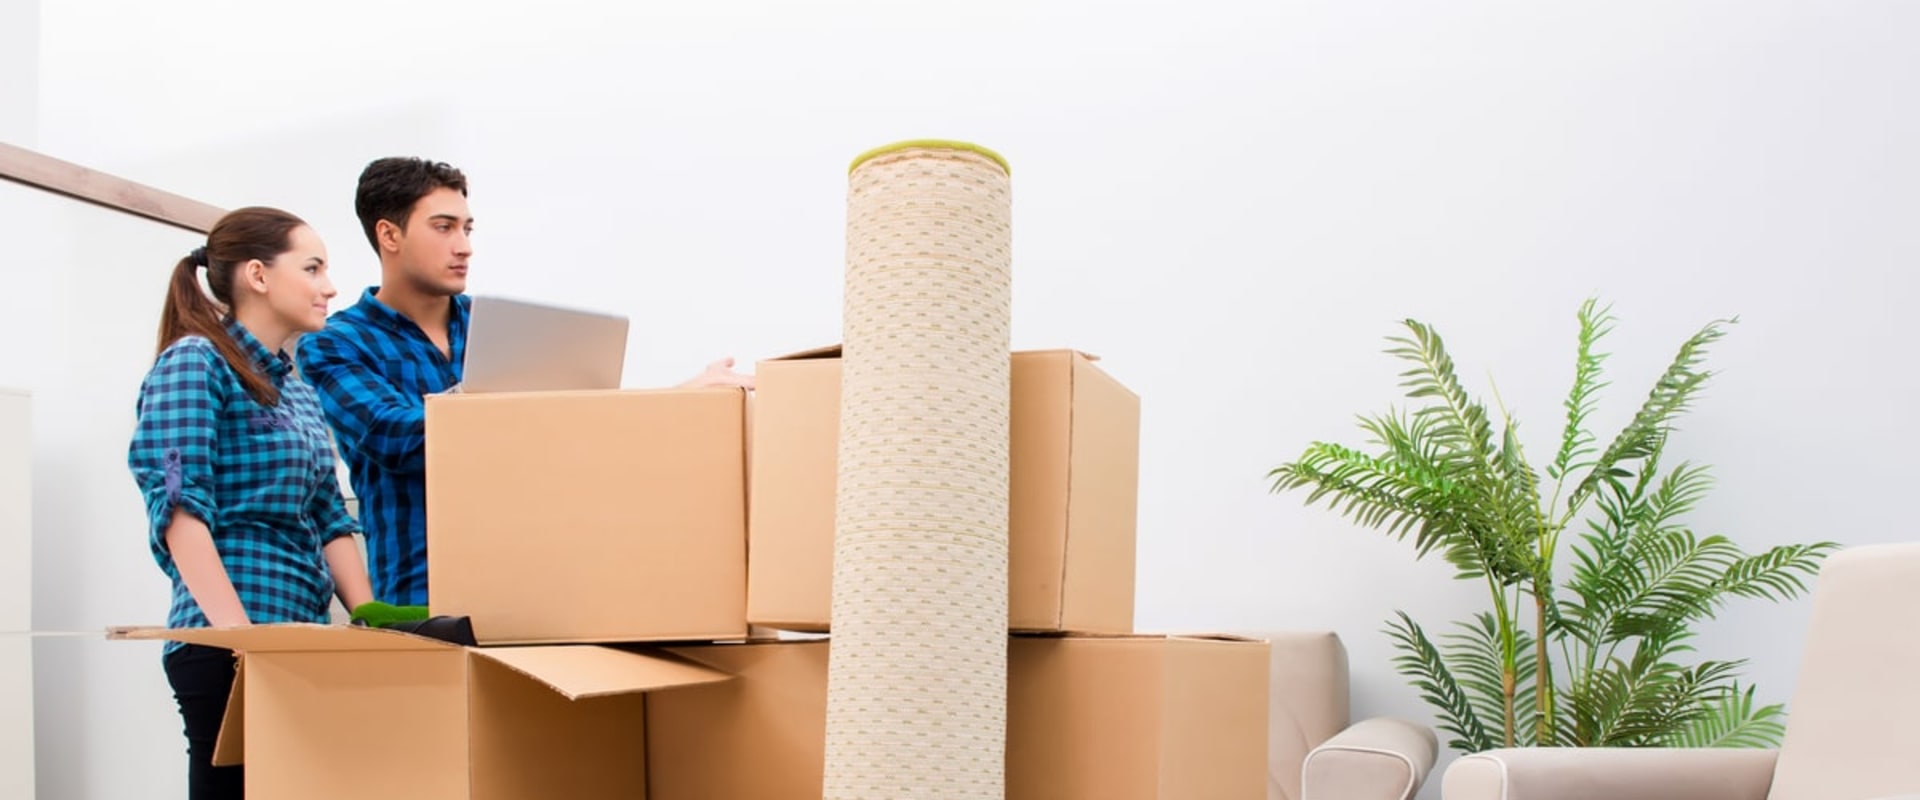 11 Things to Do While Movers are Moving Your Stuff